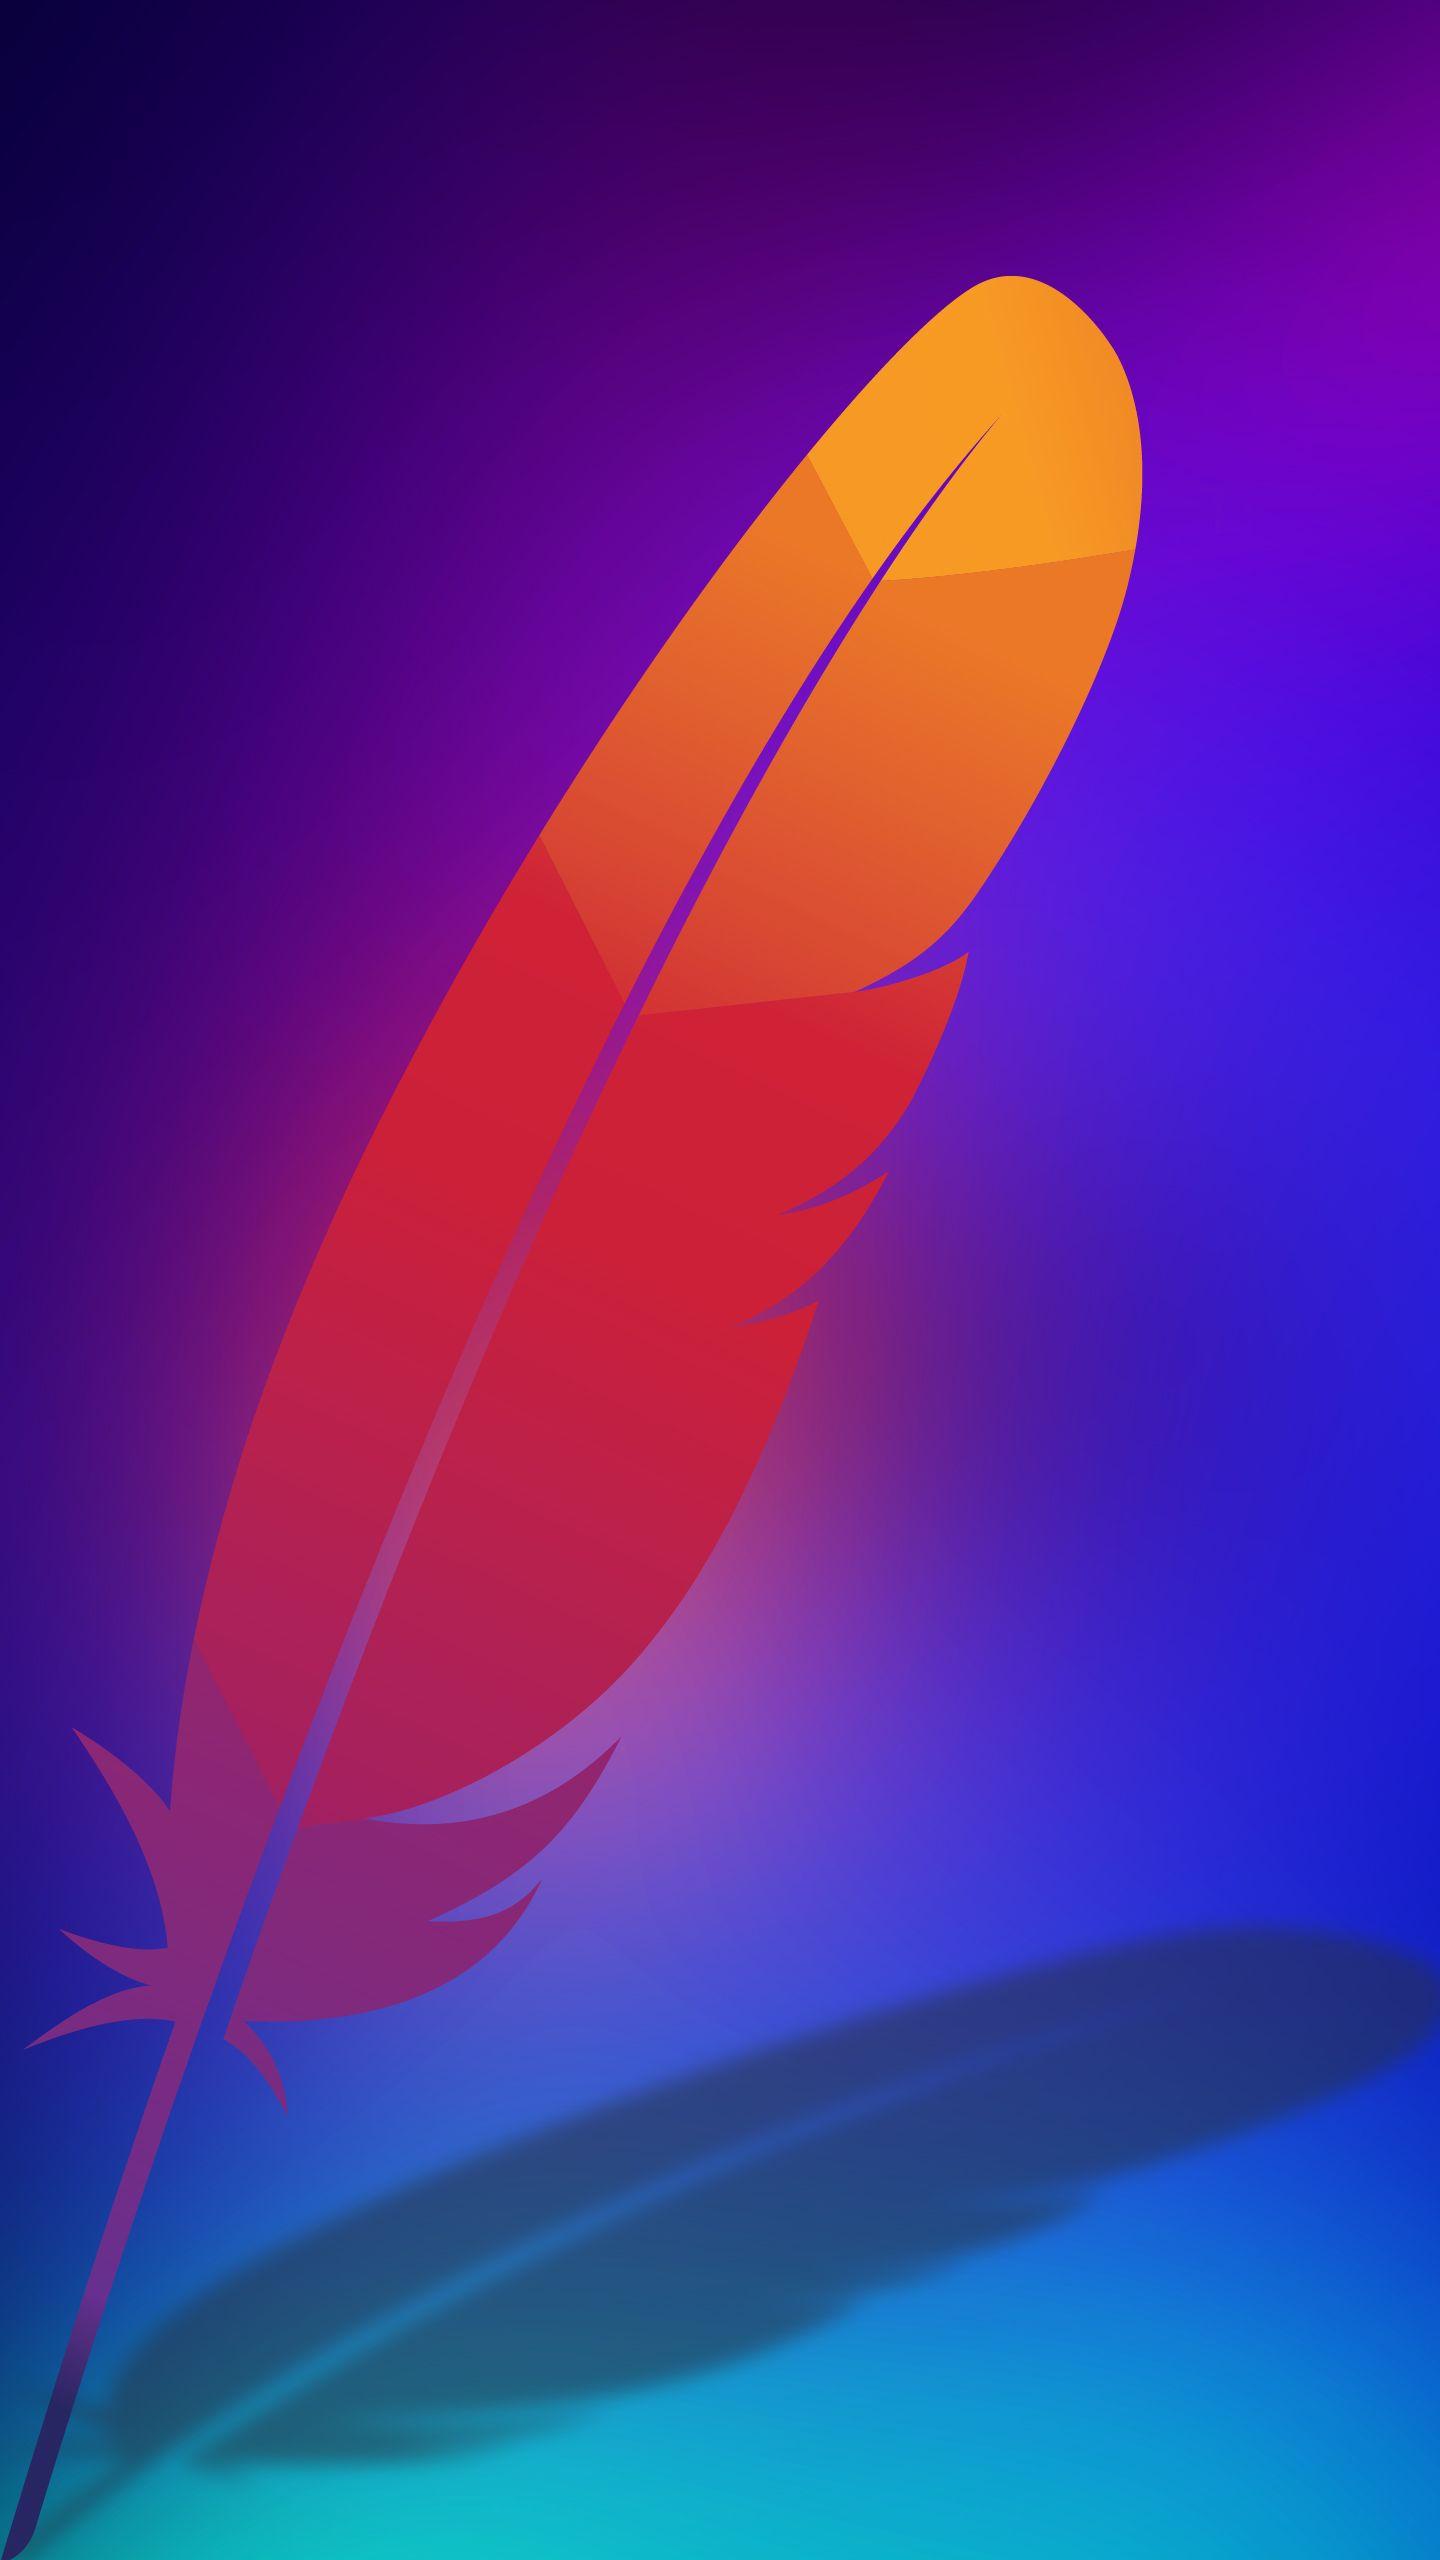 Feather Wallpaper Galaxy Note 7